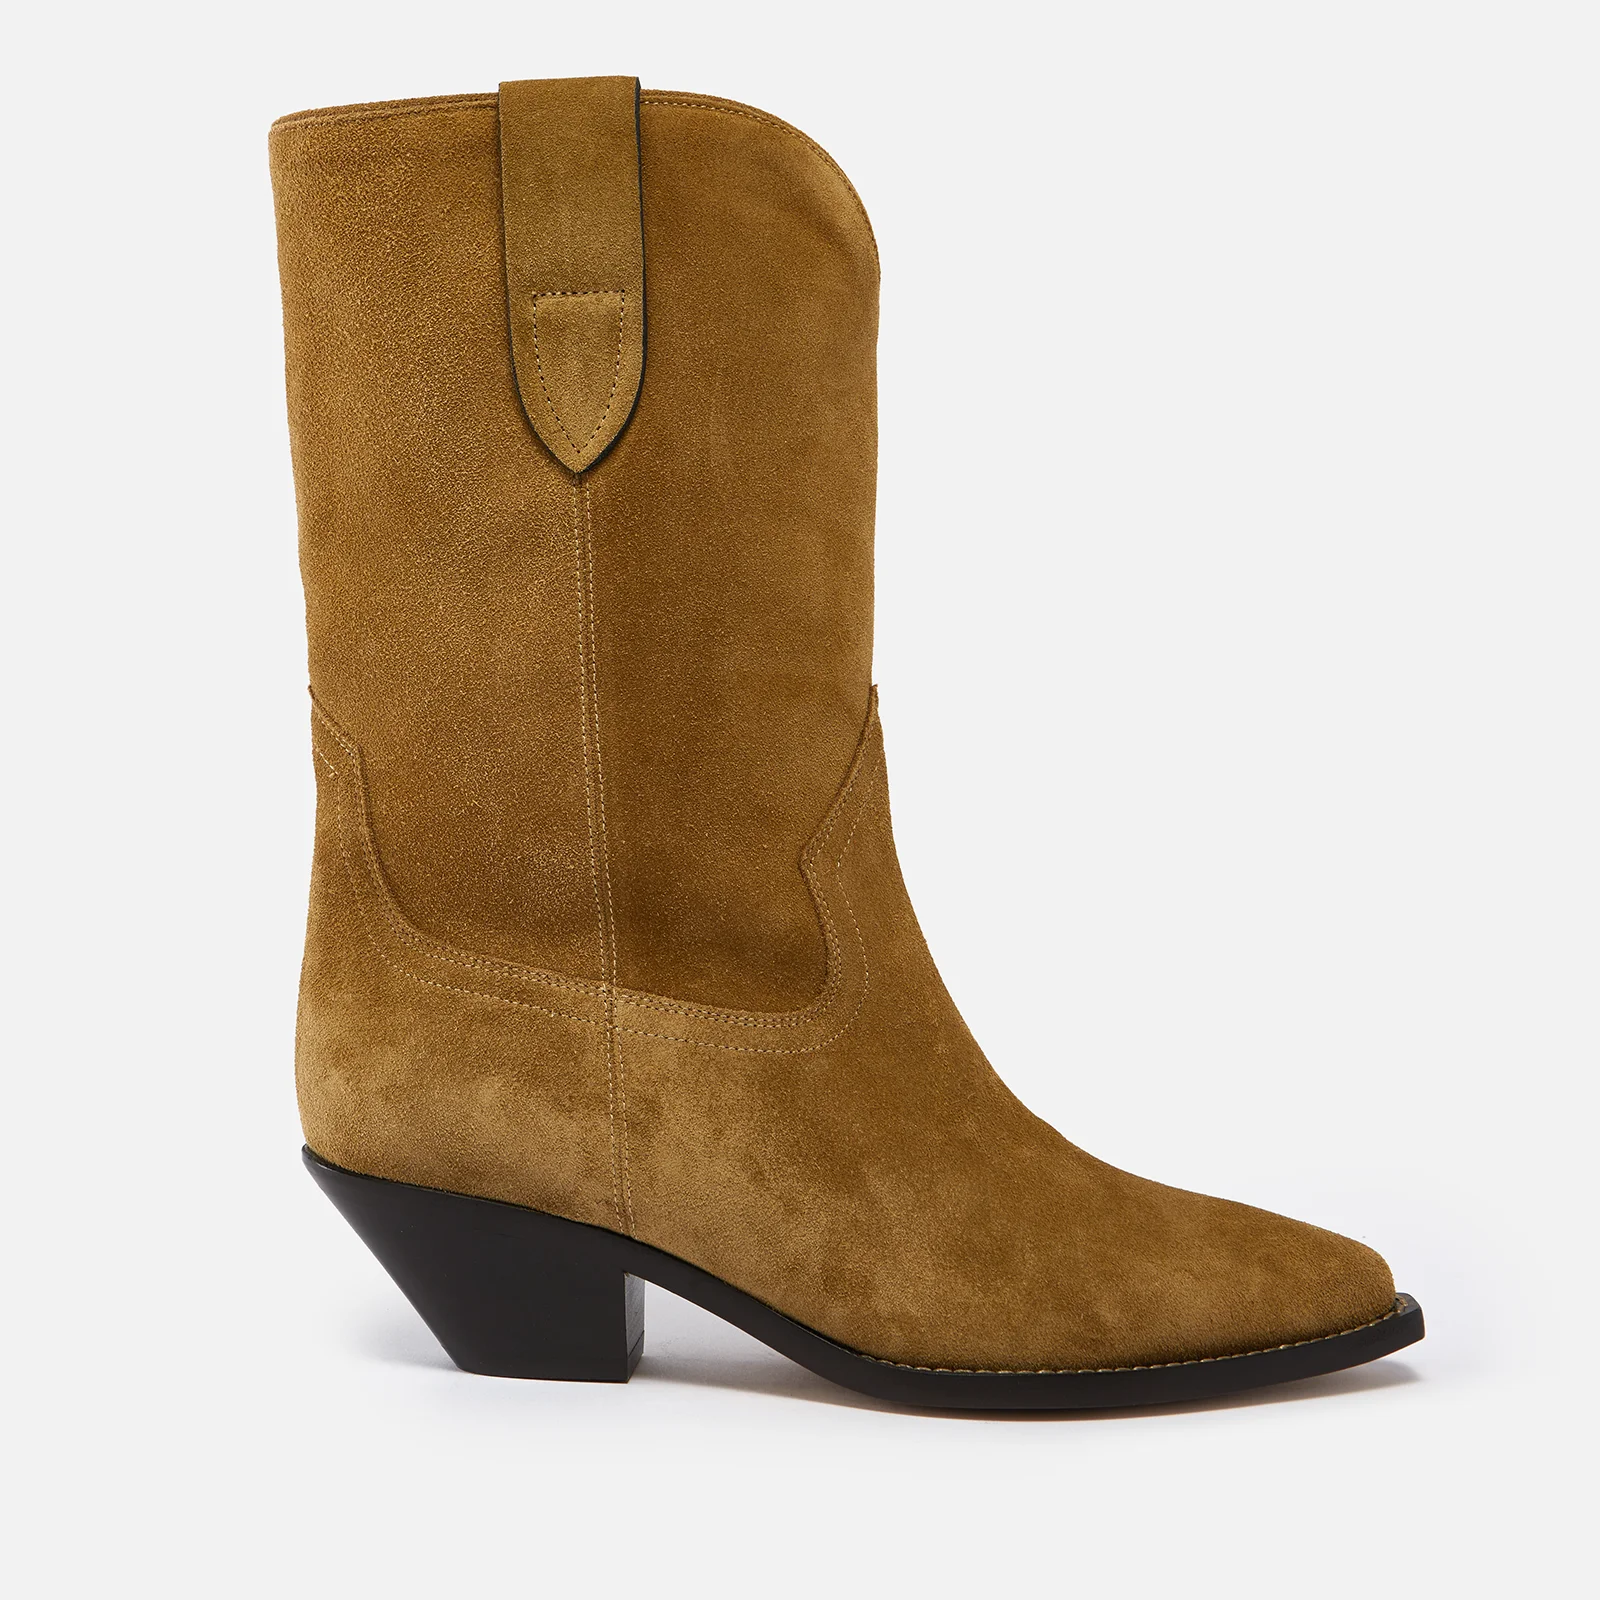 Isabel Marant Dahope Suede Boots Image 1